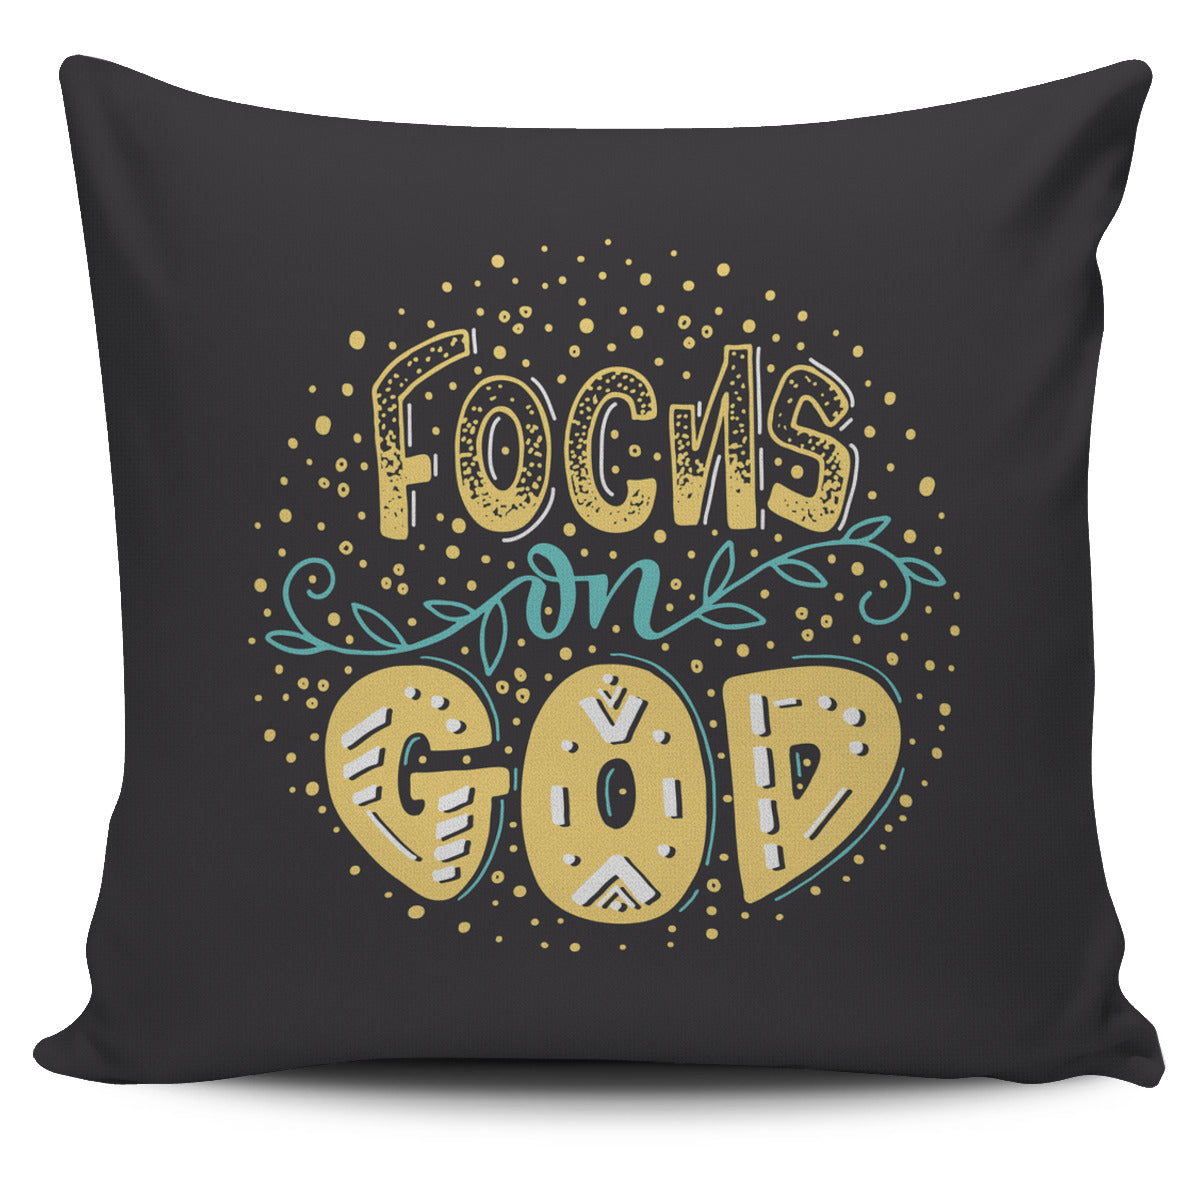 Focus On God Pillow Cover